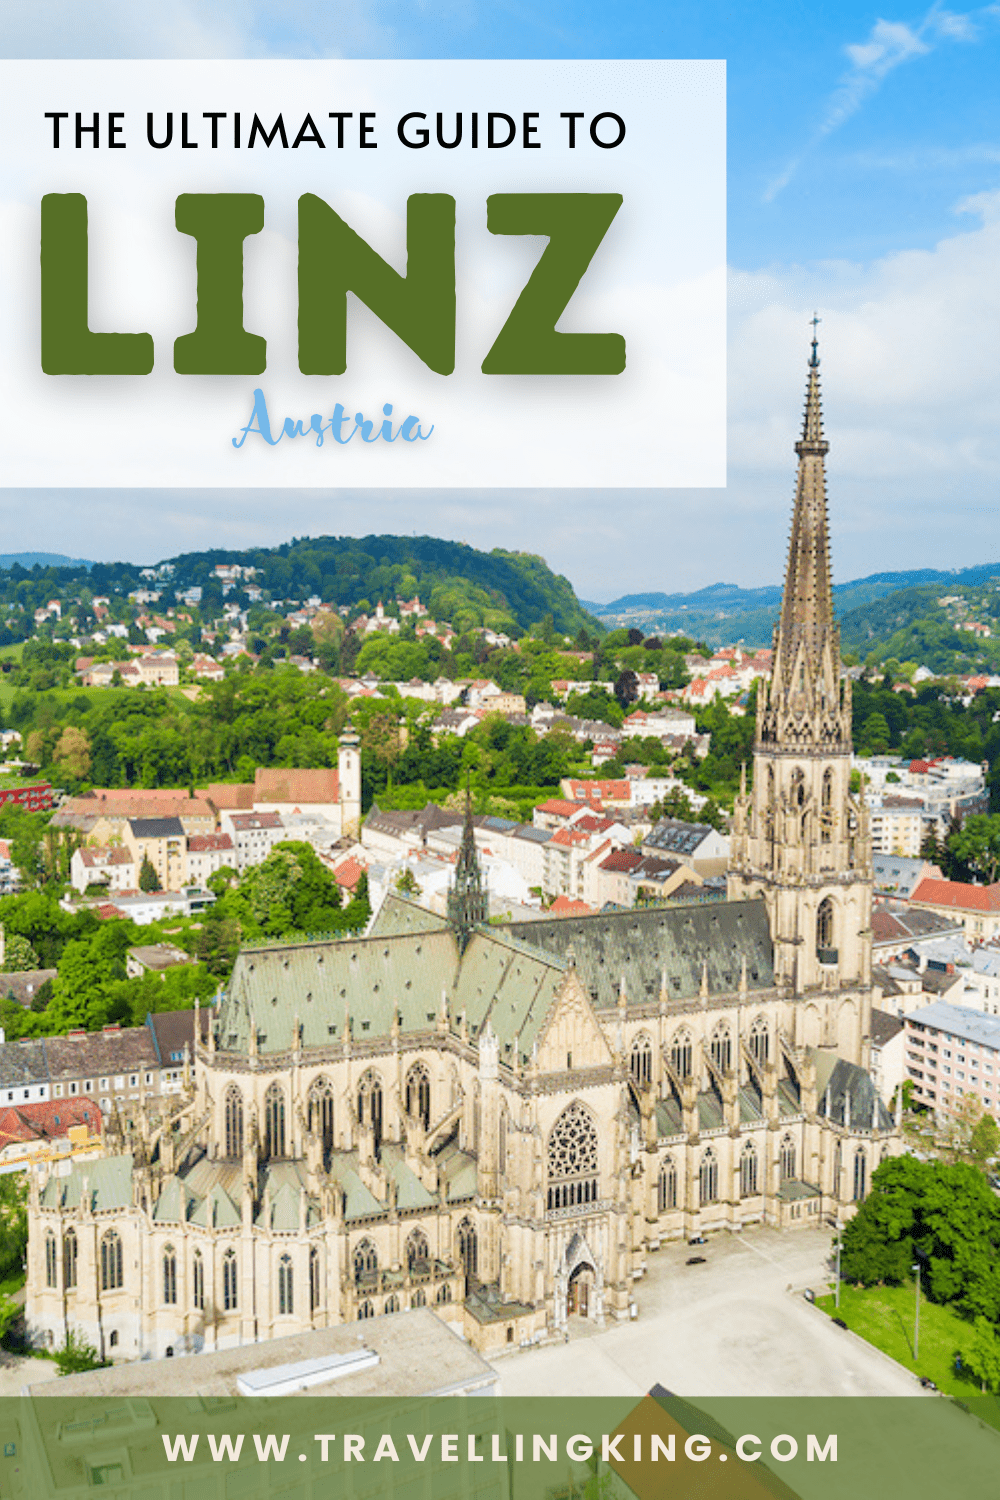 The Ultimate Guide to Linz Austria